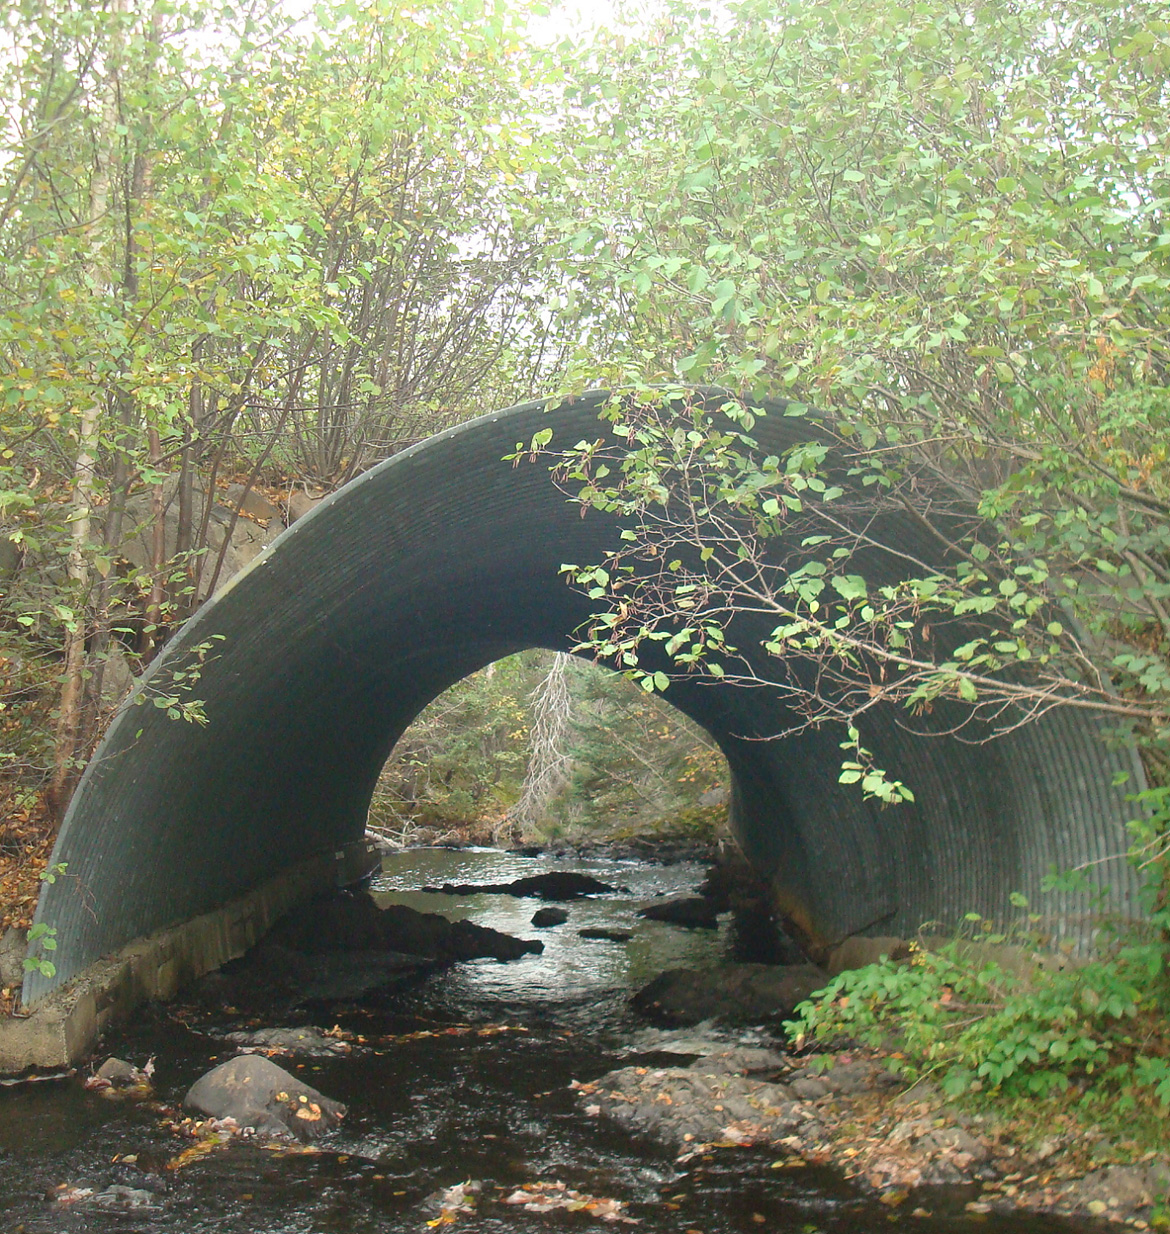 A culvert in good condition. A steel arch over a flowing stream.